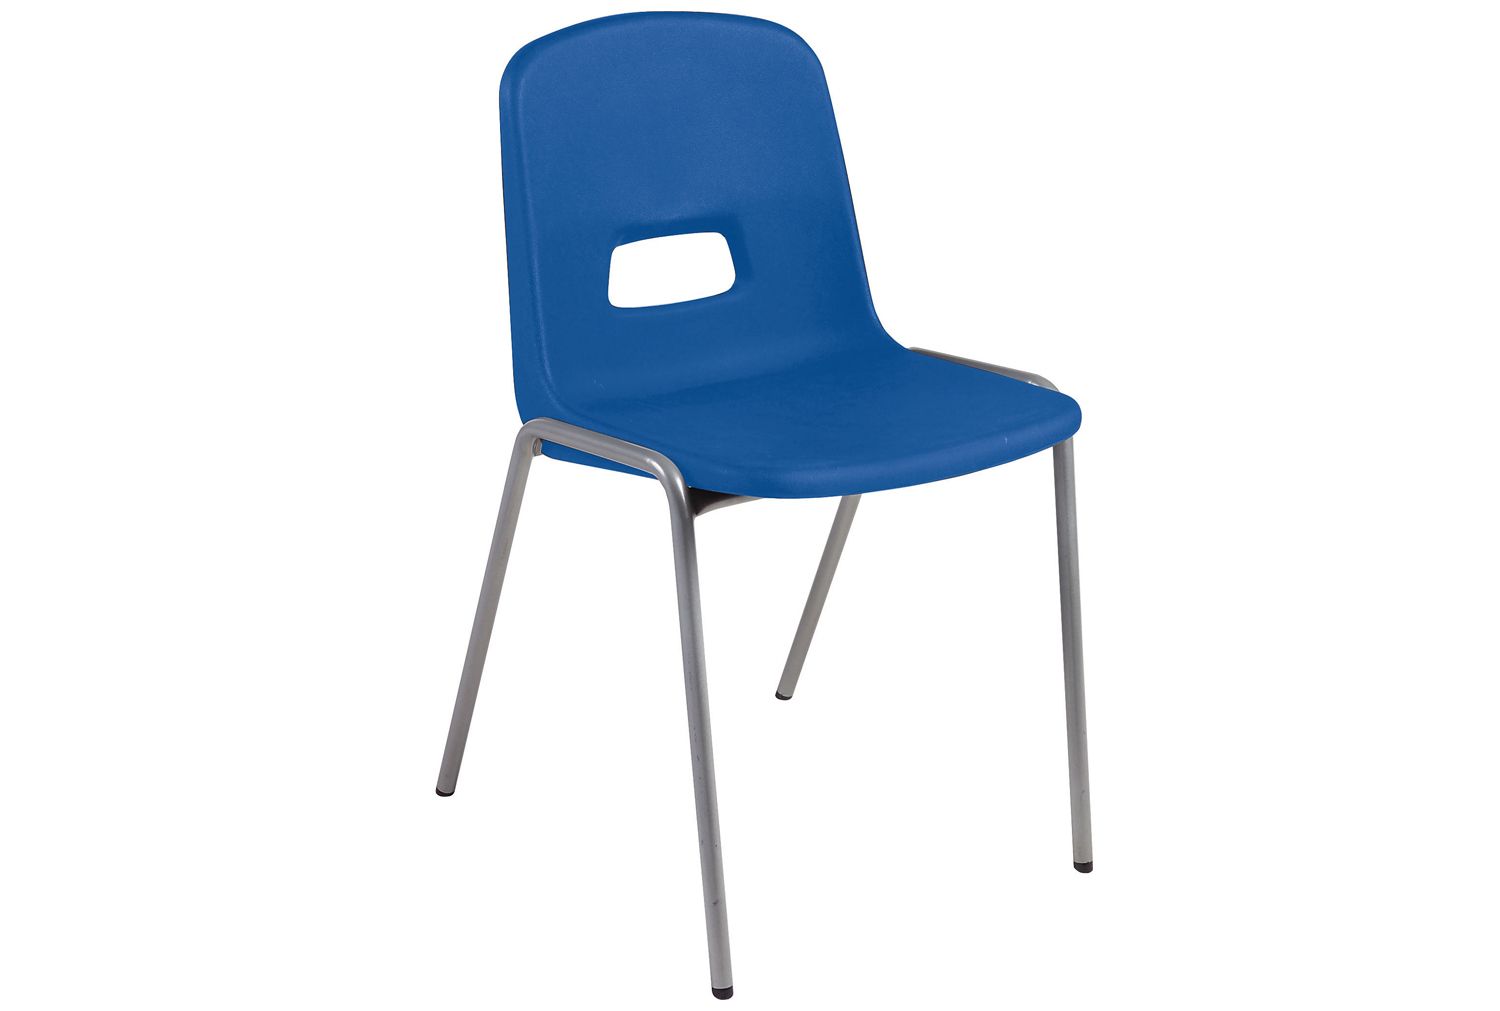 Qty 8 - Reinspire GH20 Classroom Chair, 11-14 Years - 40wx37dx43h (cm), Red